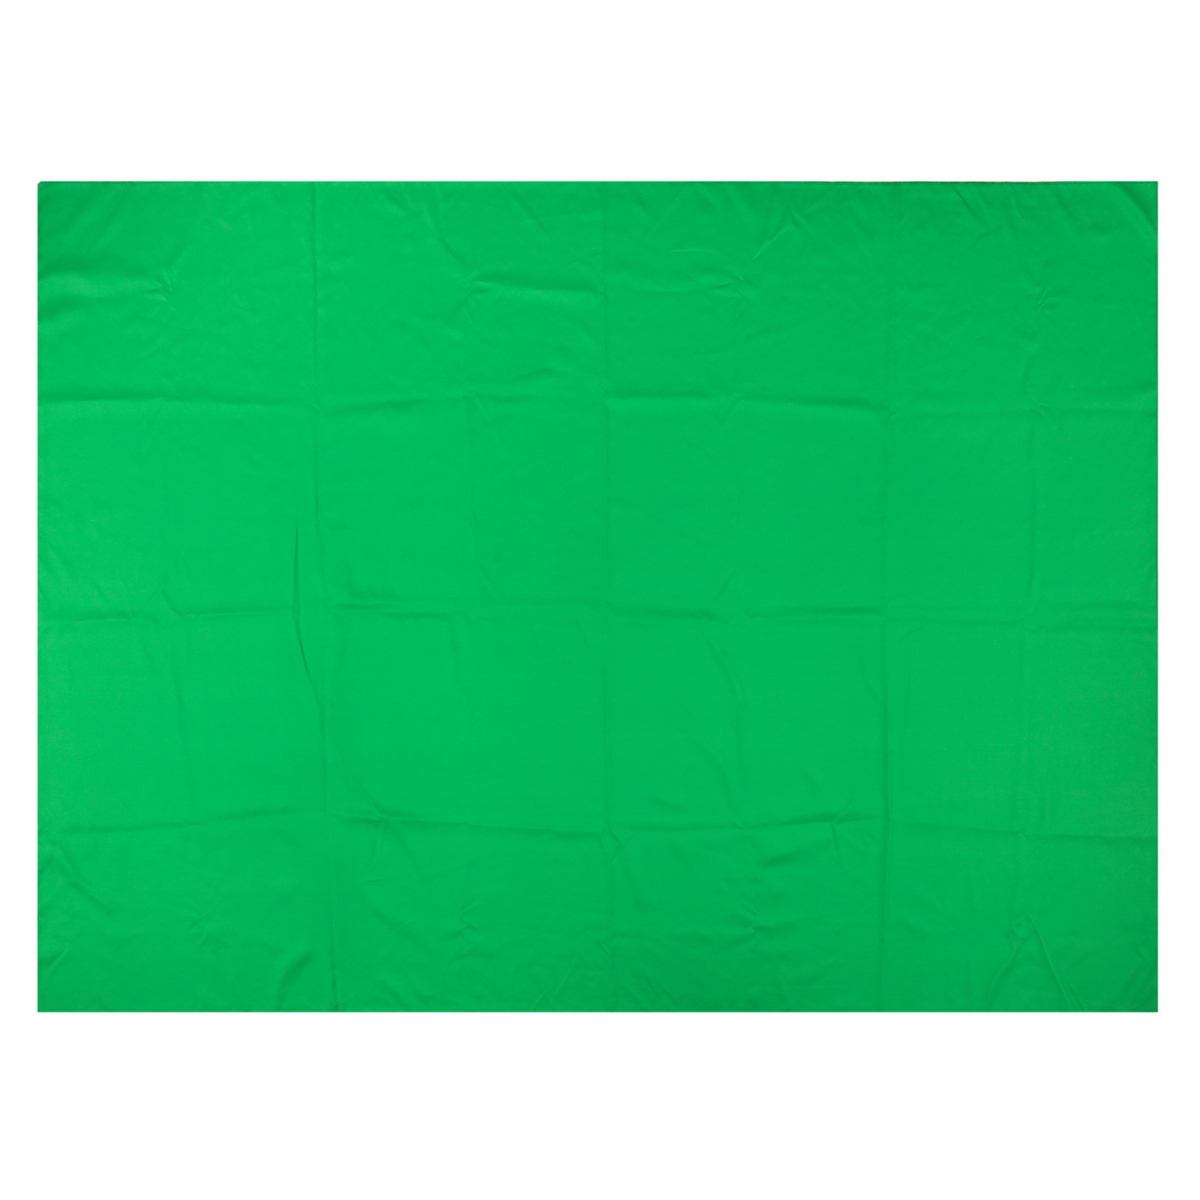 7x5FT-Green-Photography-Backdrop-Background-Studio-Photography-Prop-1632882-3